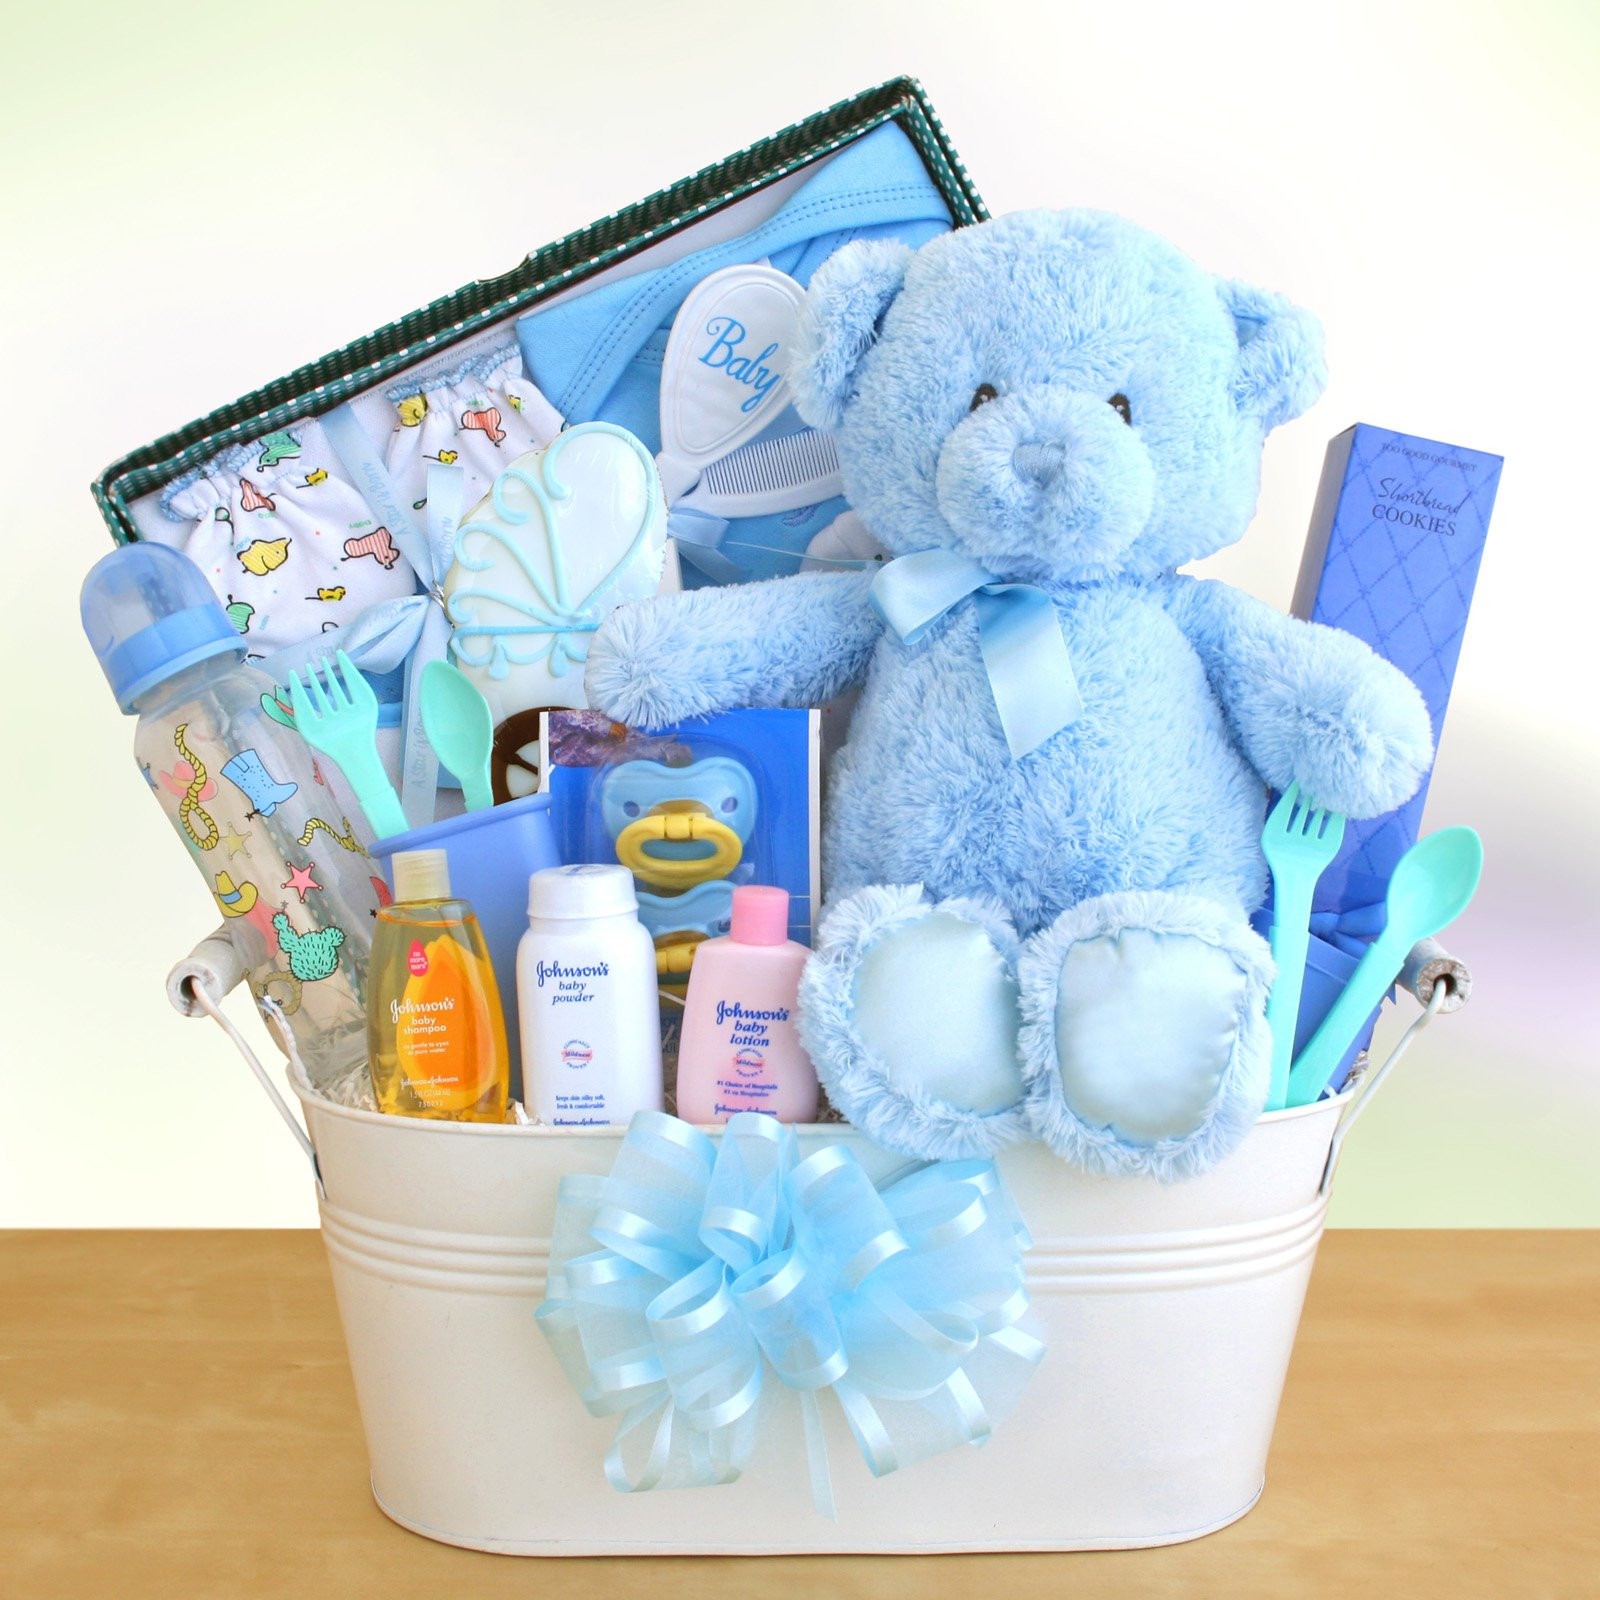 Best ideas about Newborn Gift Ideas
. Save or Pin New Arrival Baby Boy Gift Basket Gift Baskets by Now.